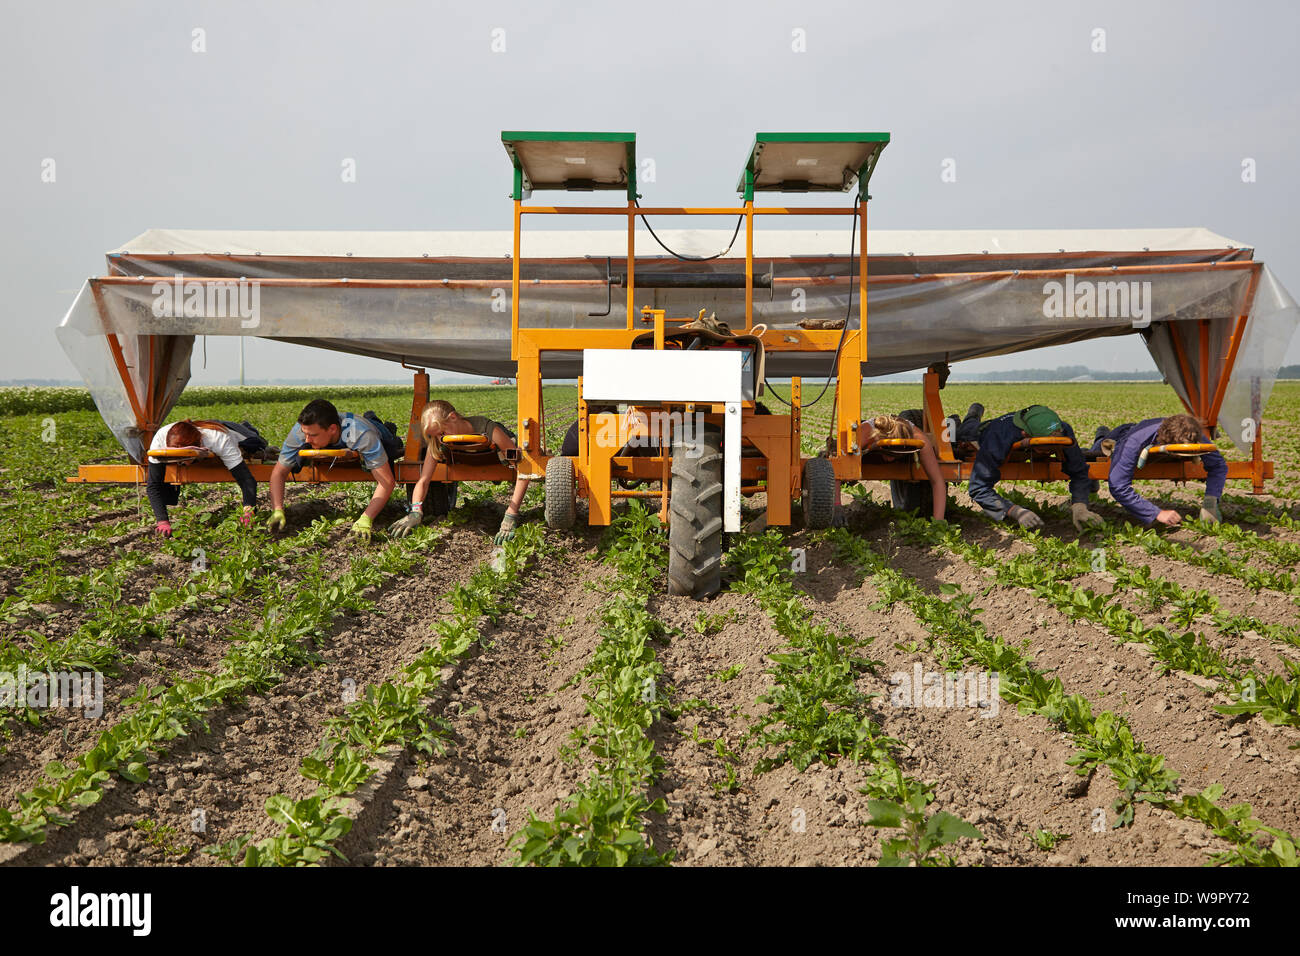 Seasonal migrant farm workers using custom made agricultural machine to weed between the rows of the chicory plants Stock Photo